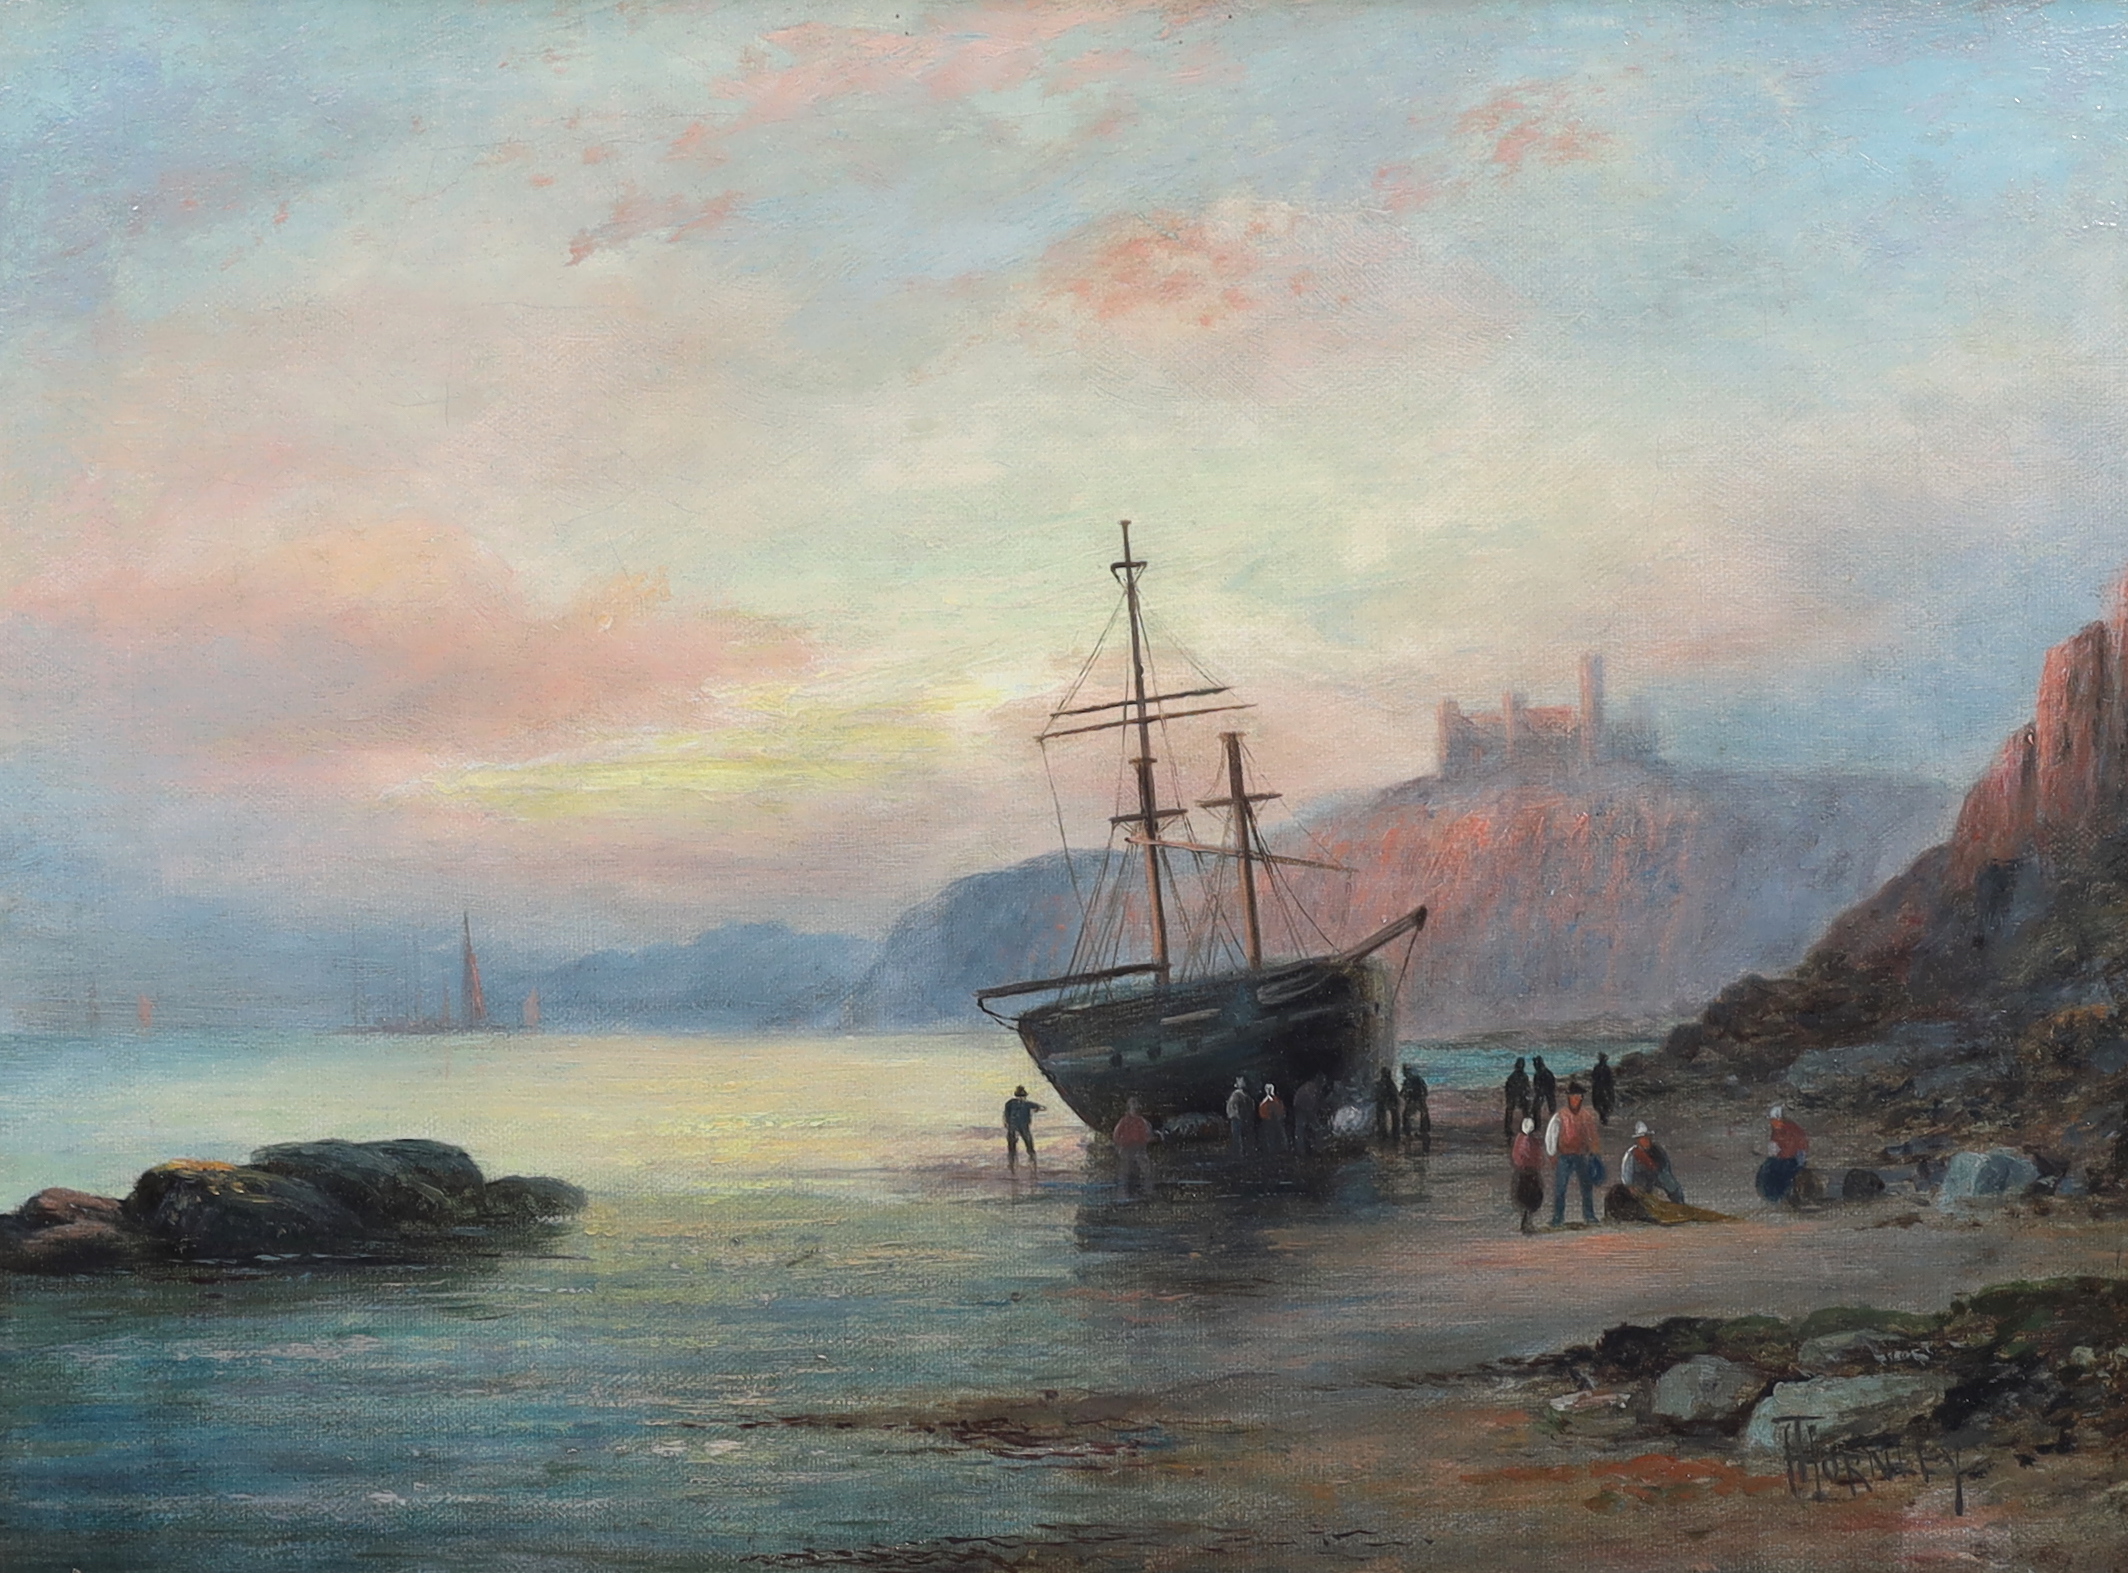 Hubert Thornley (William Anslow Thornley) (fl.1859-1898), Beached ship on the shore near Whitby, oil on canvas, 30 x 40cm